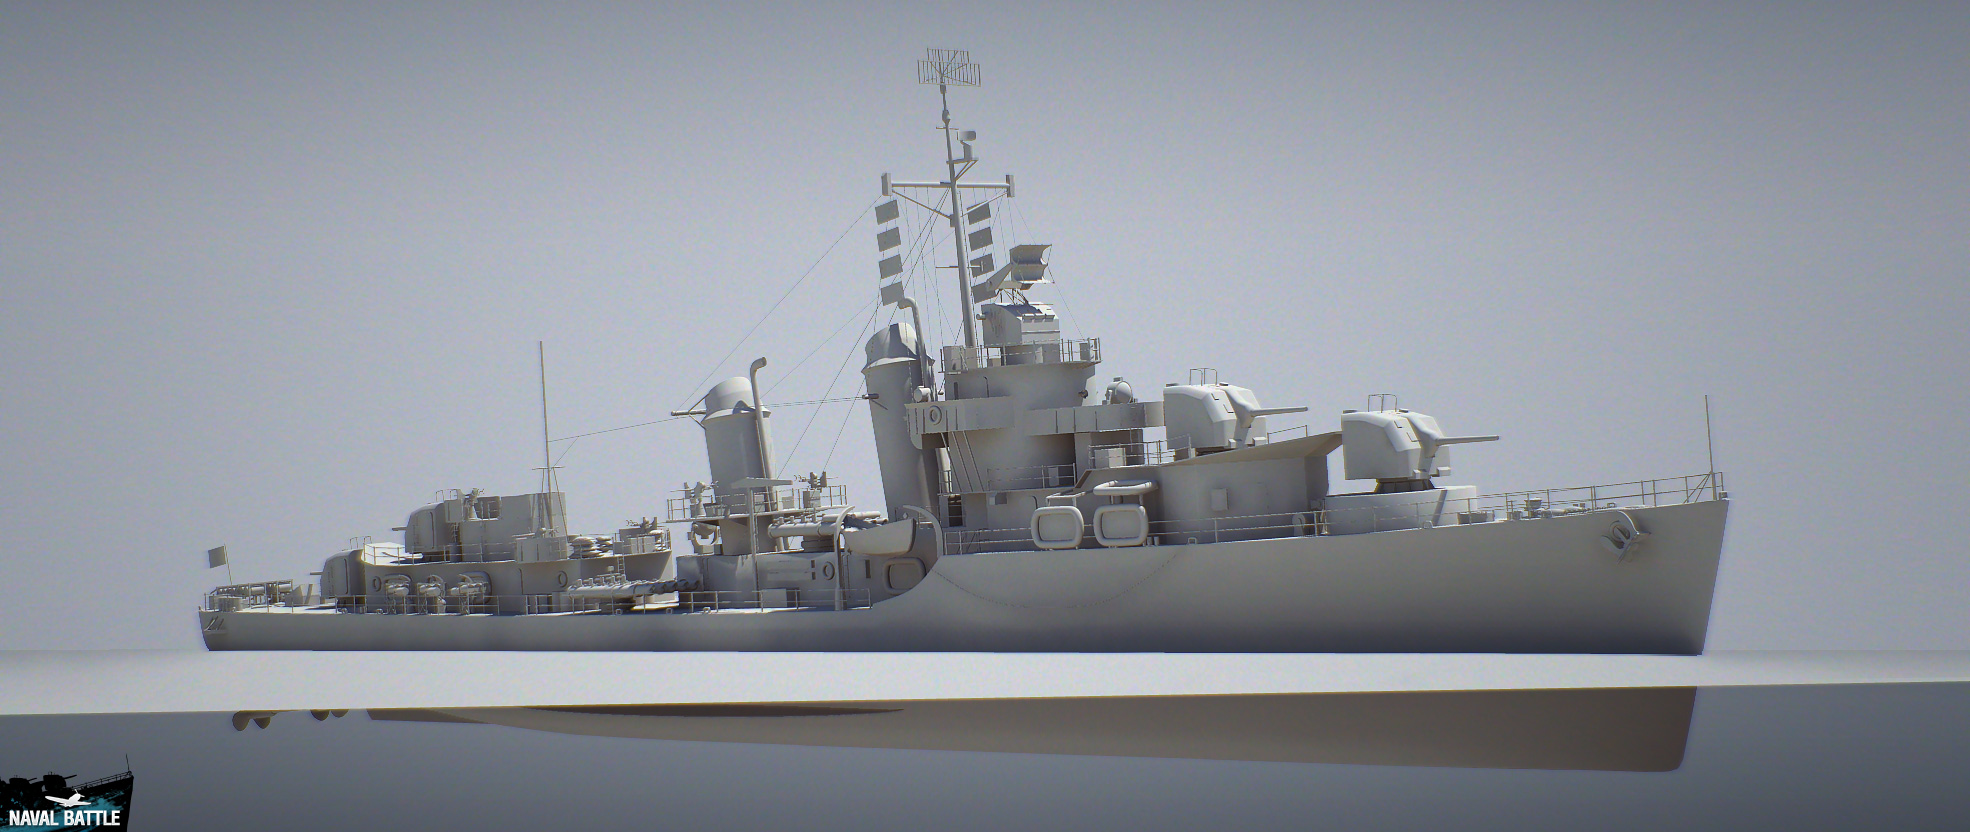 naval_battle__destroyer_by_count_one-d7j36rp.jpg